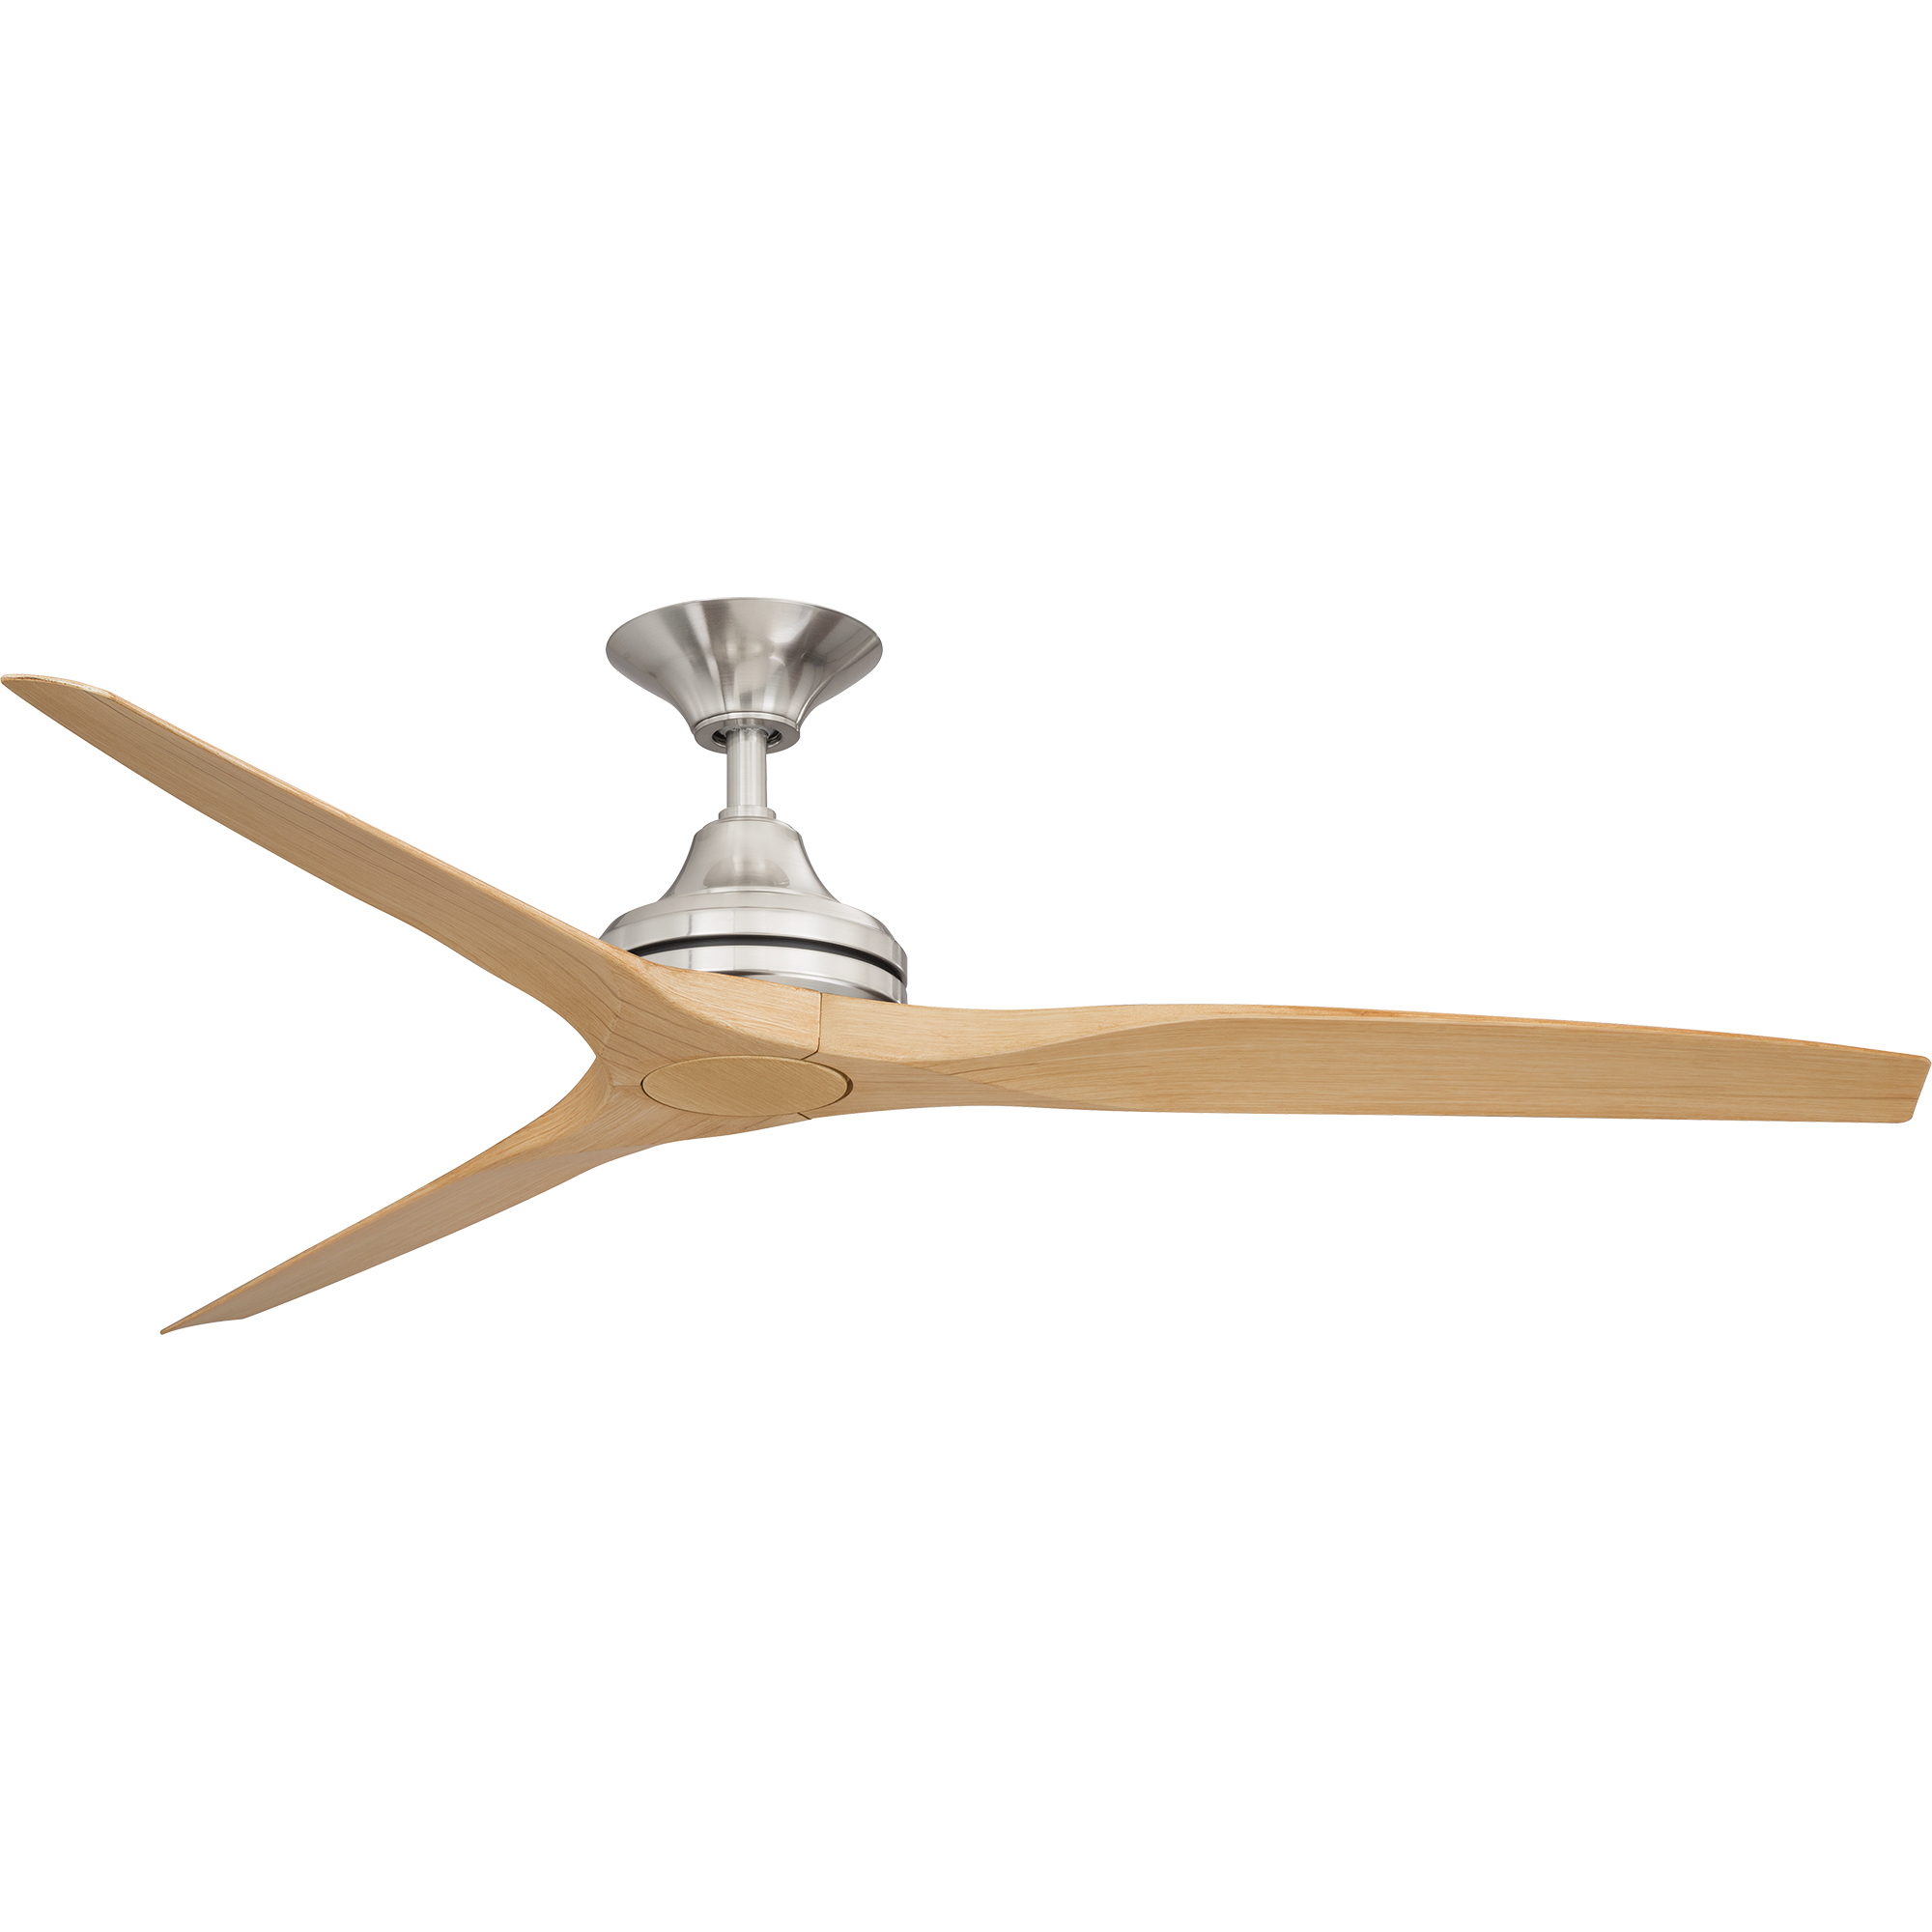 60" Spitfire ceiling fan in Brushed Nickel with Natural polymer blades